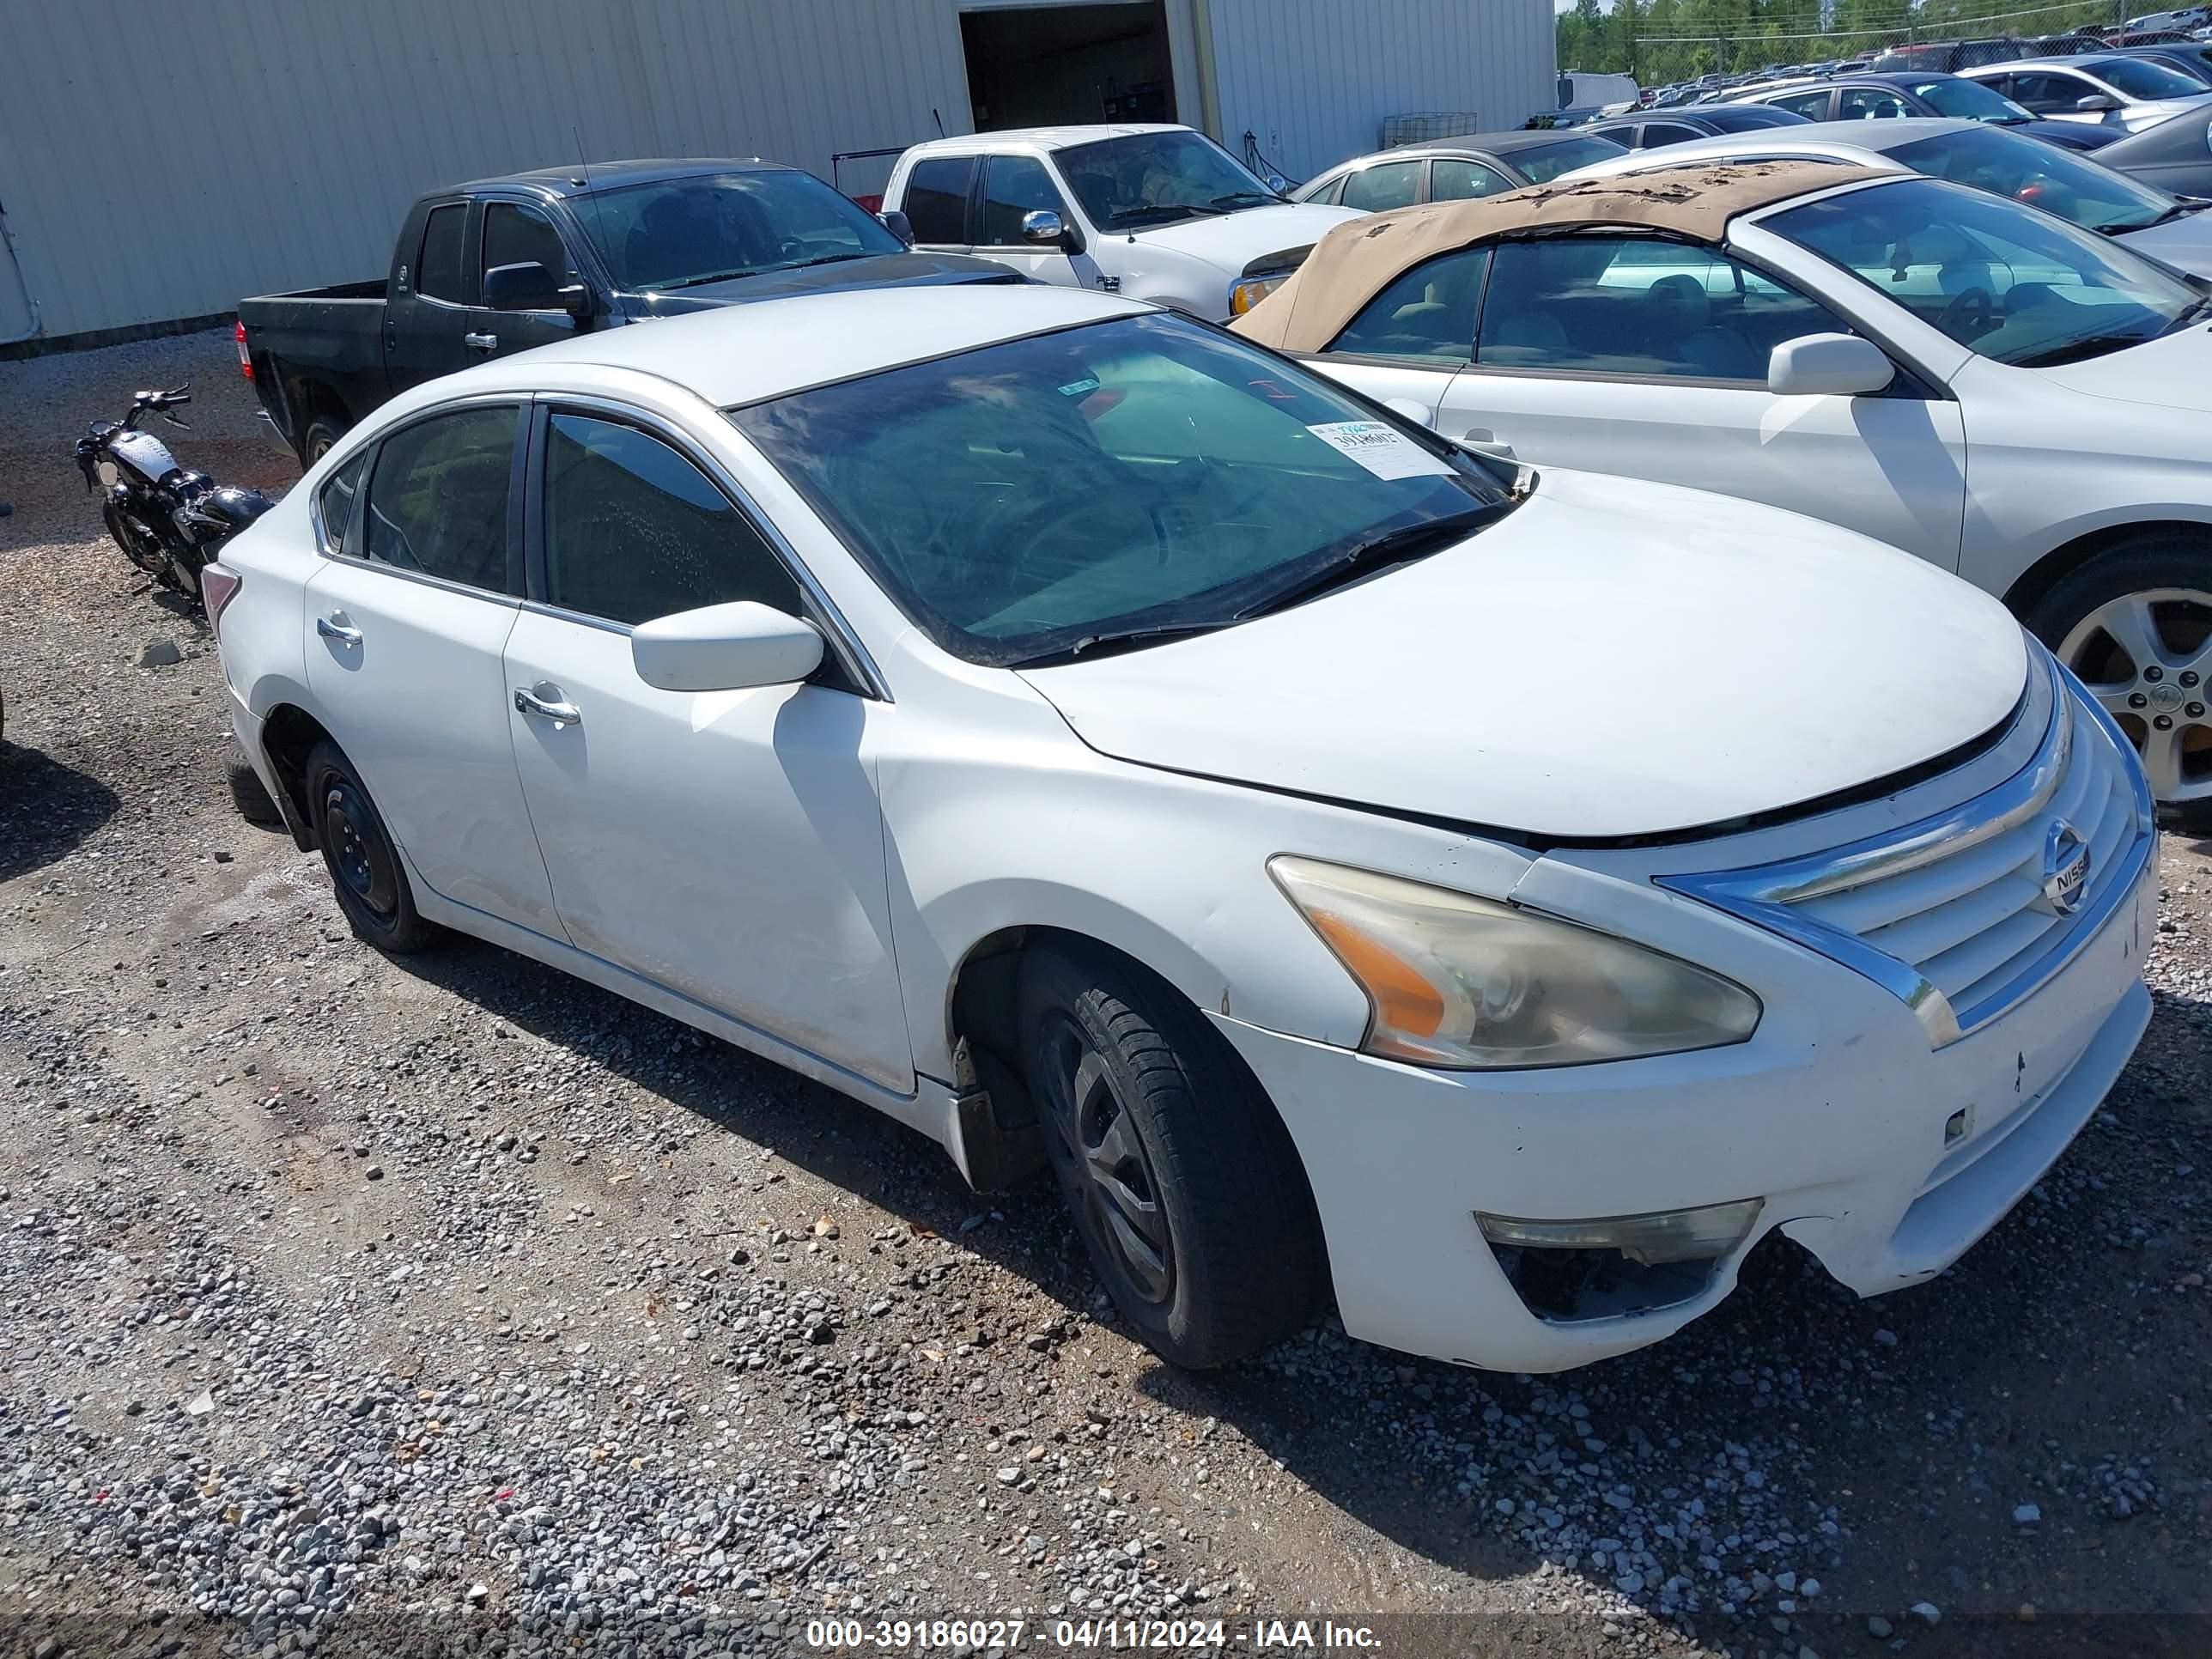 vin: 1N4AL3APXFC212961 1N4AL3APXFC212961 2015 nissan altima 2500 for Sale in 39562, 8209 Old Stage Rd, Moss Point, Mississippi, USA